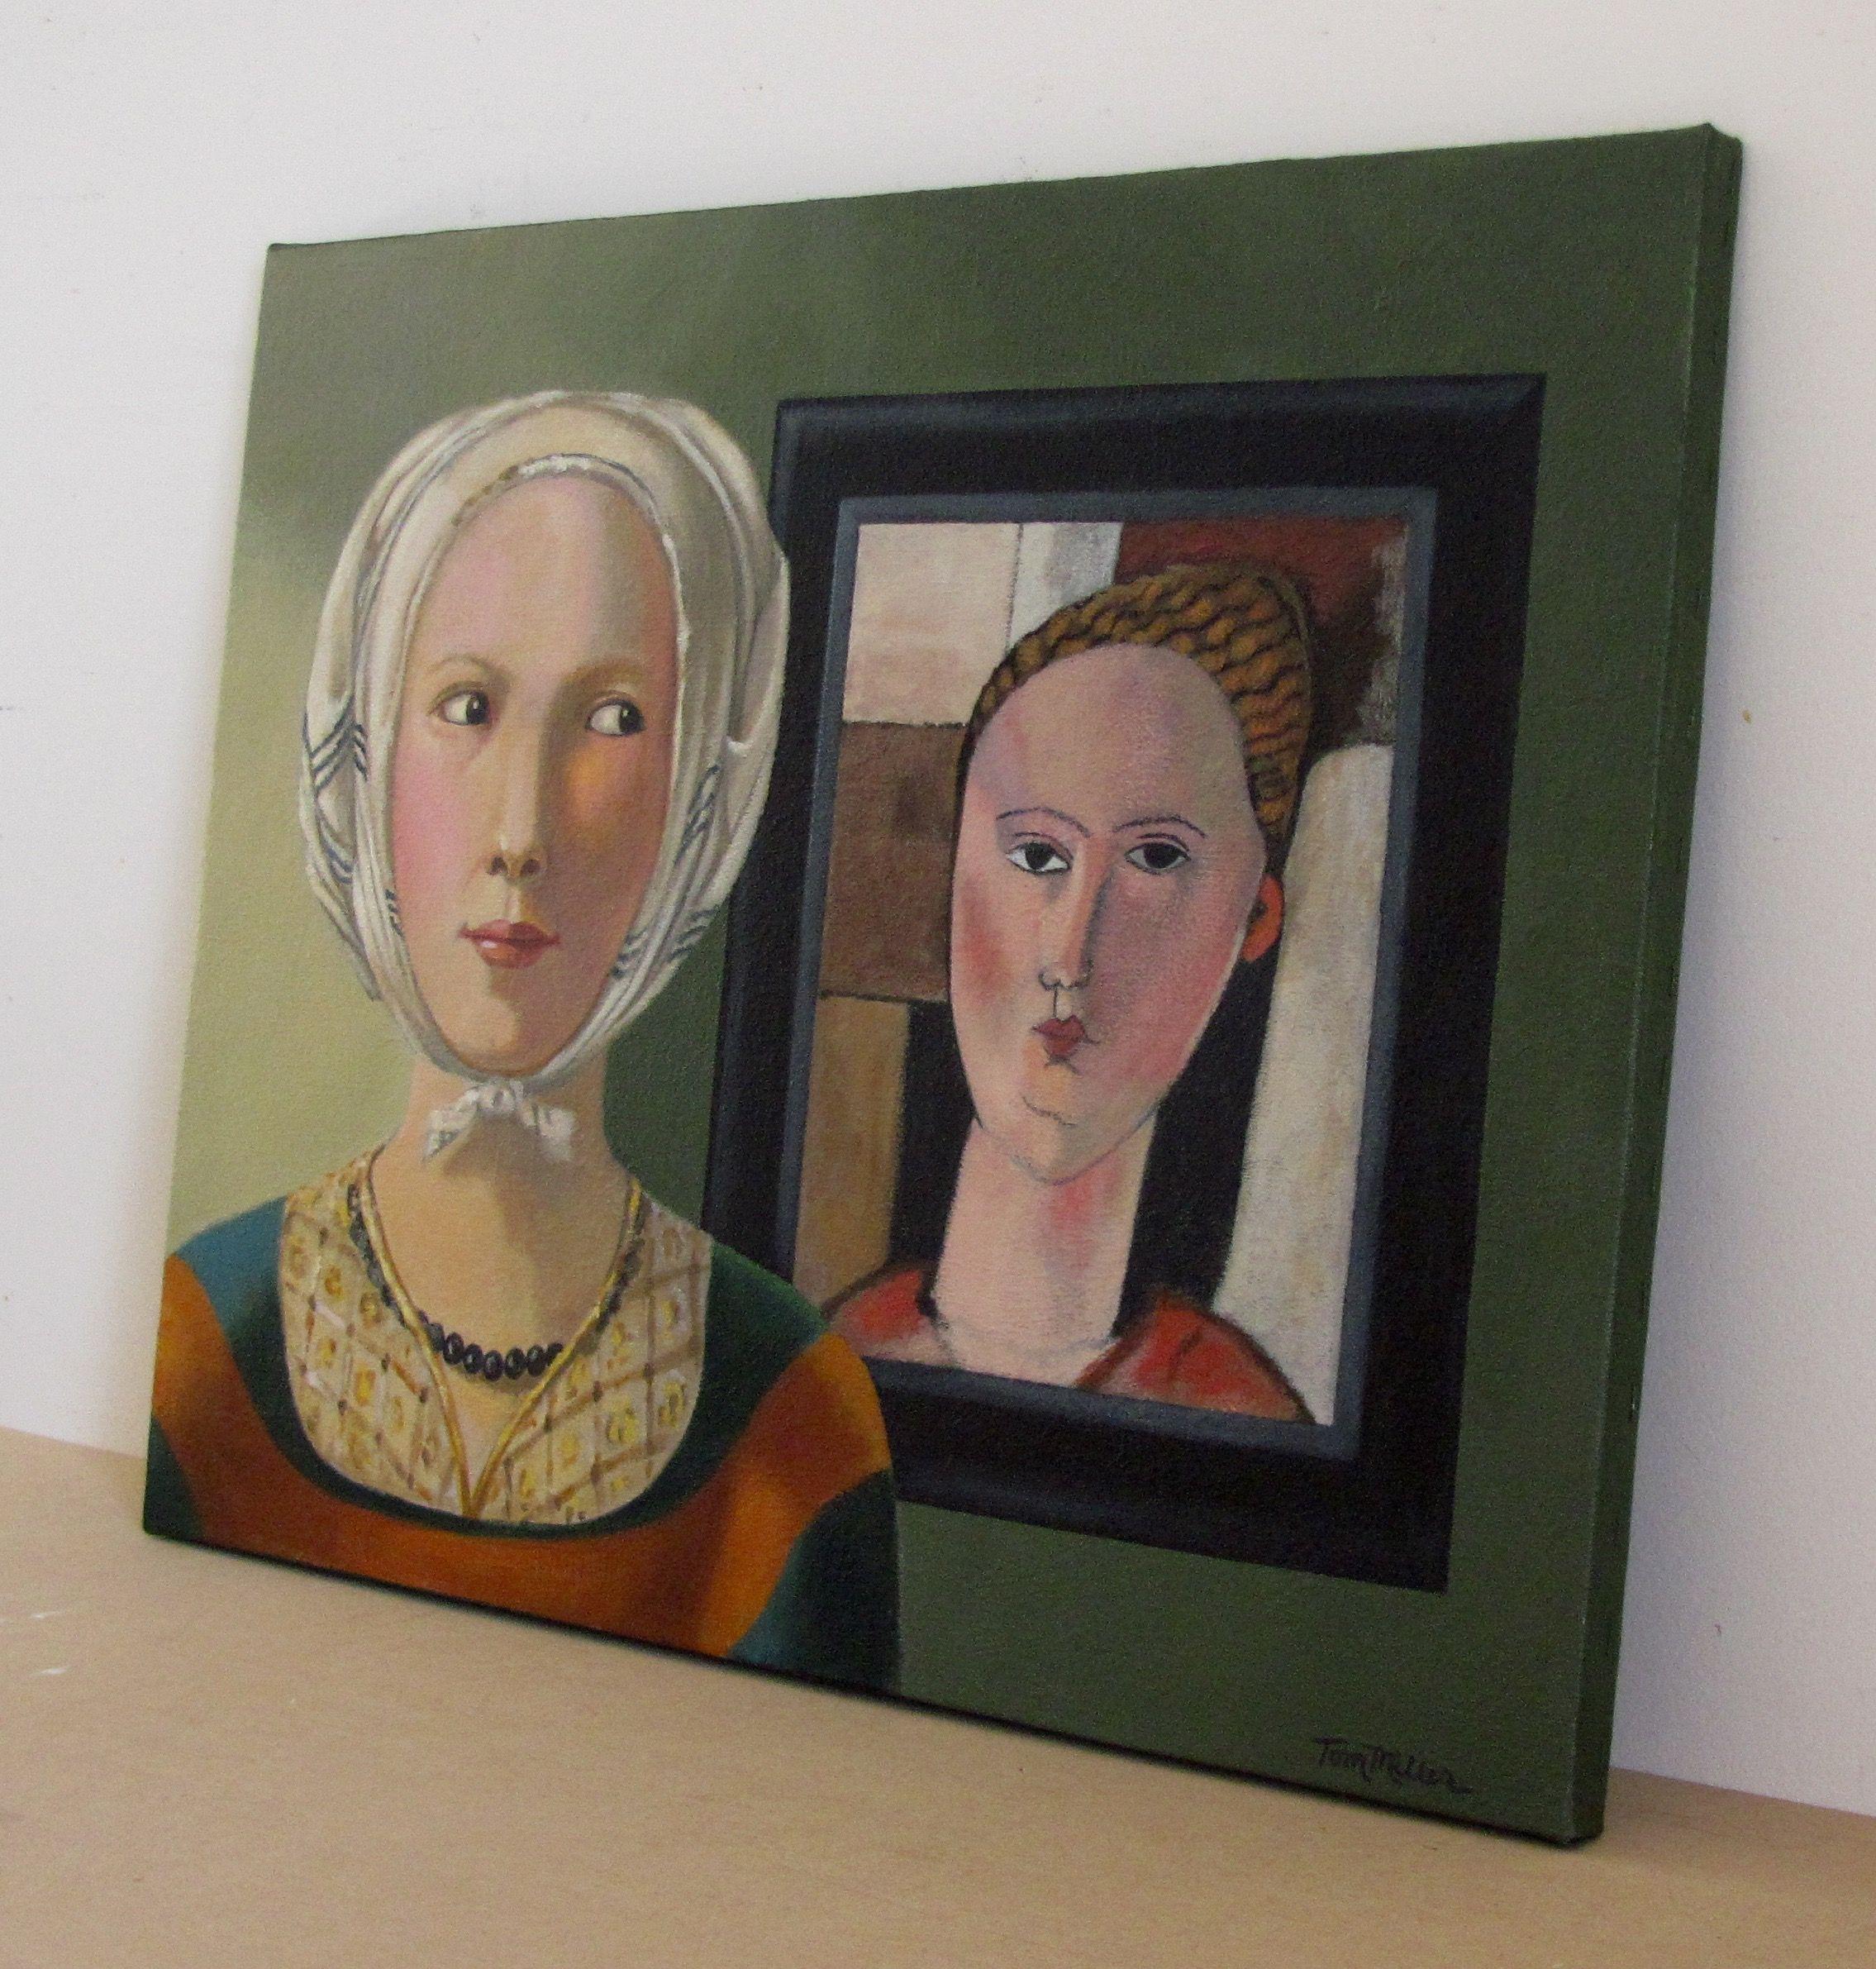 TWO WOMEN features portraits by Modigliani and Georges de La Tour, and pays homage to these two great artists.  The La Tour portrait from the 17th century looks forward in time toward the Modigliani, from the early 20th century.  One may wonder what